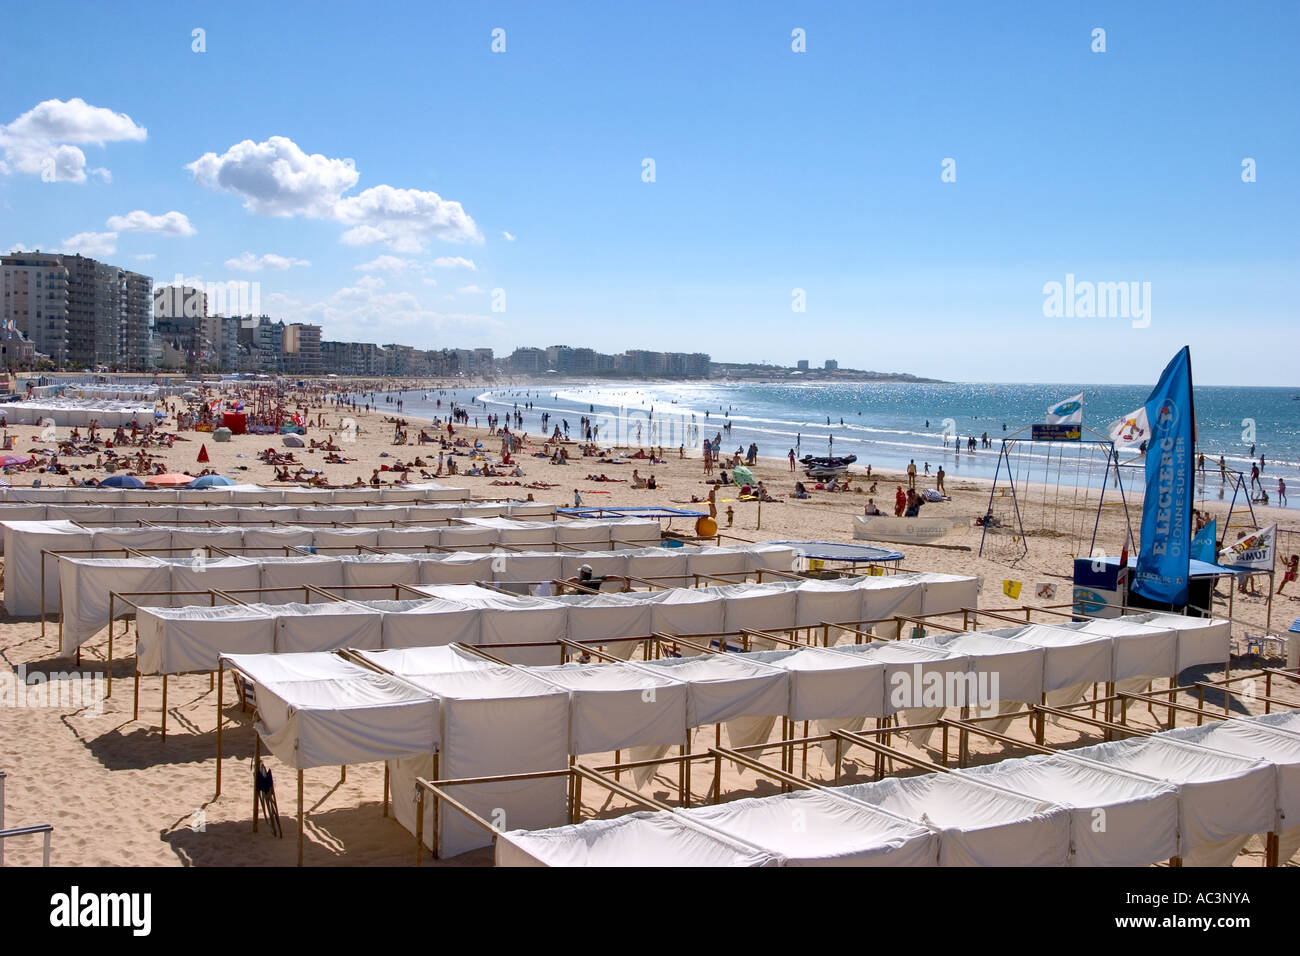 abundance of beach tent and people on a white sandy beach sun tanning and enjoying themselves sables d olonne france beach Stock Photo